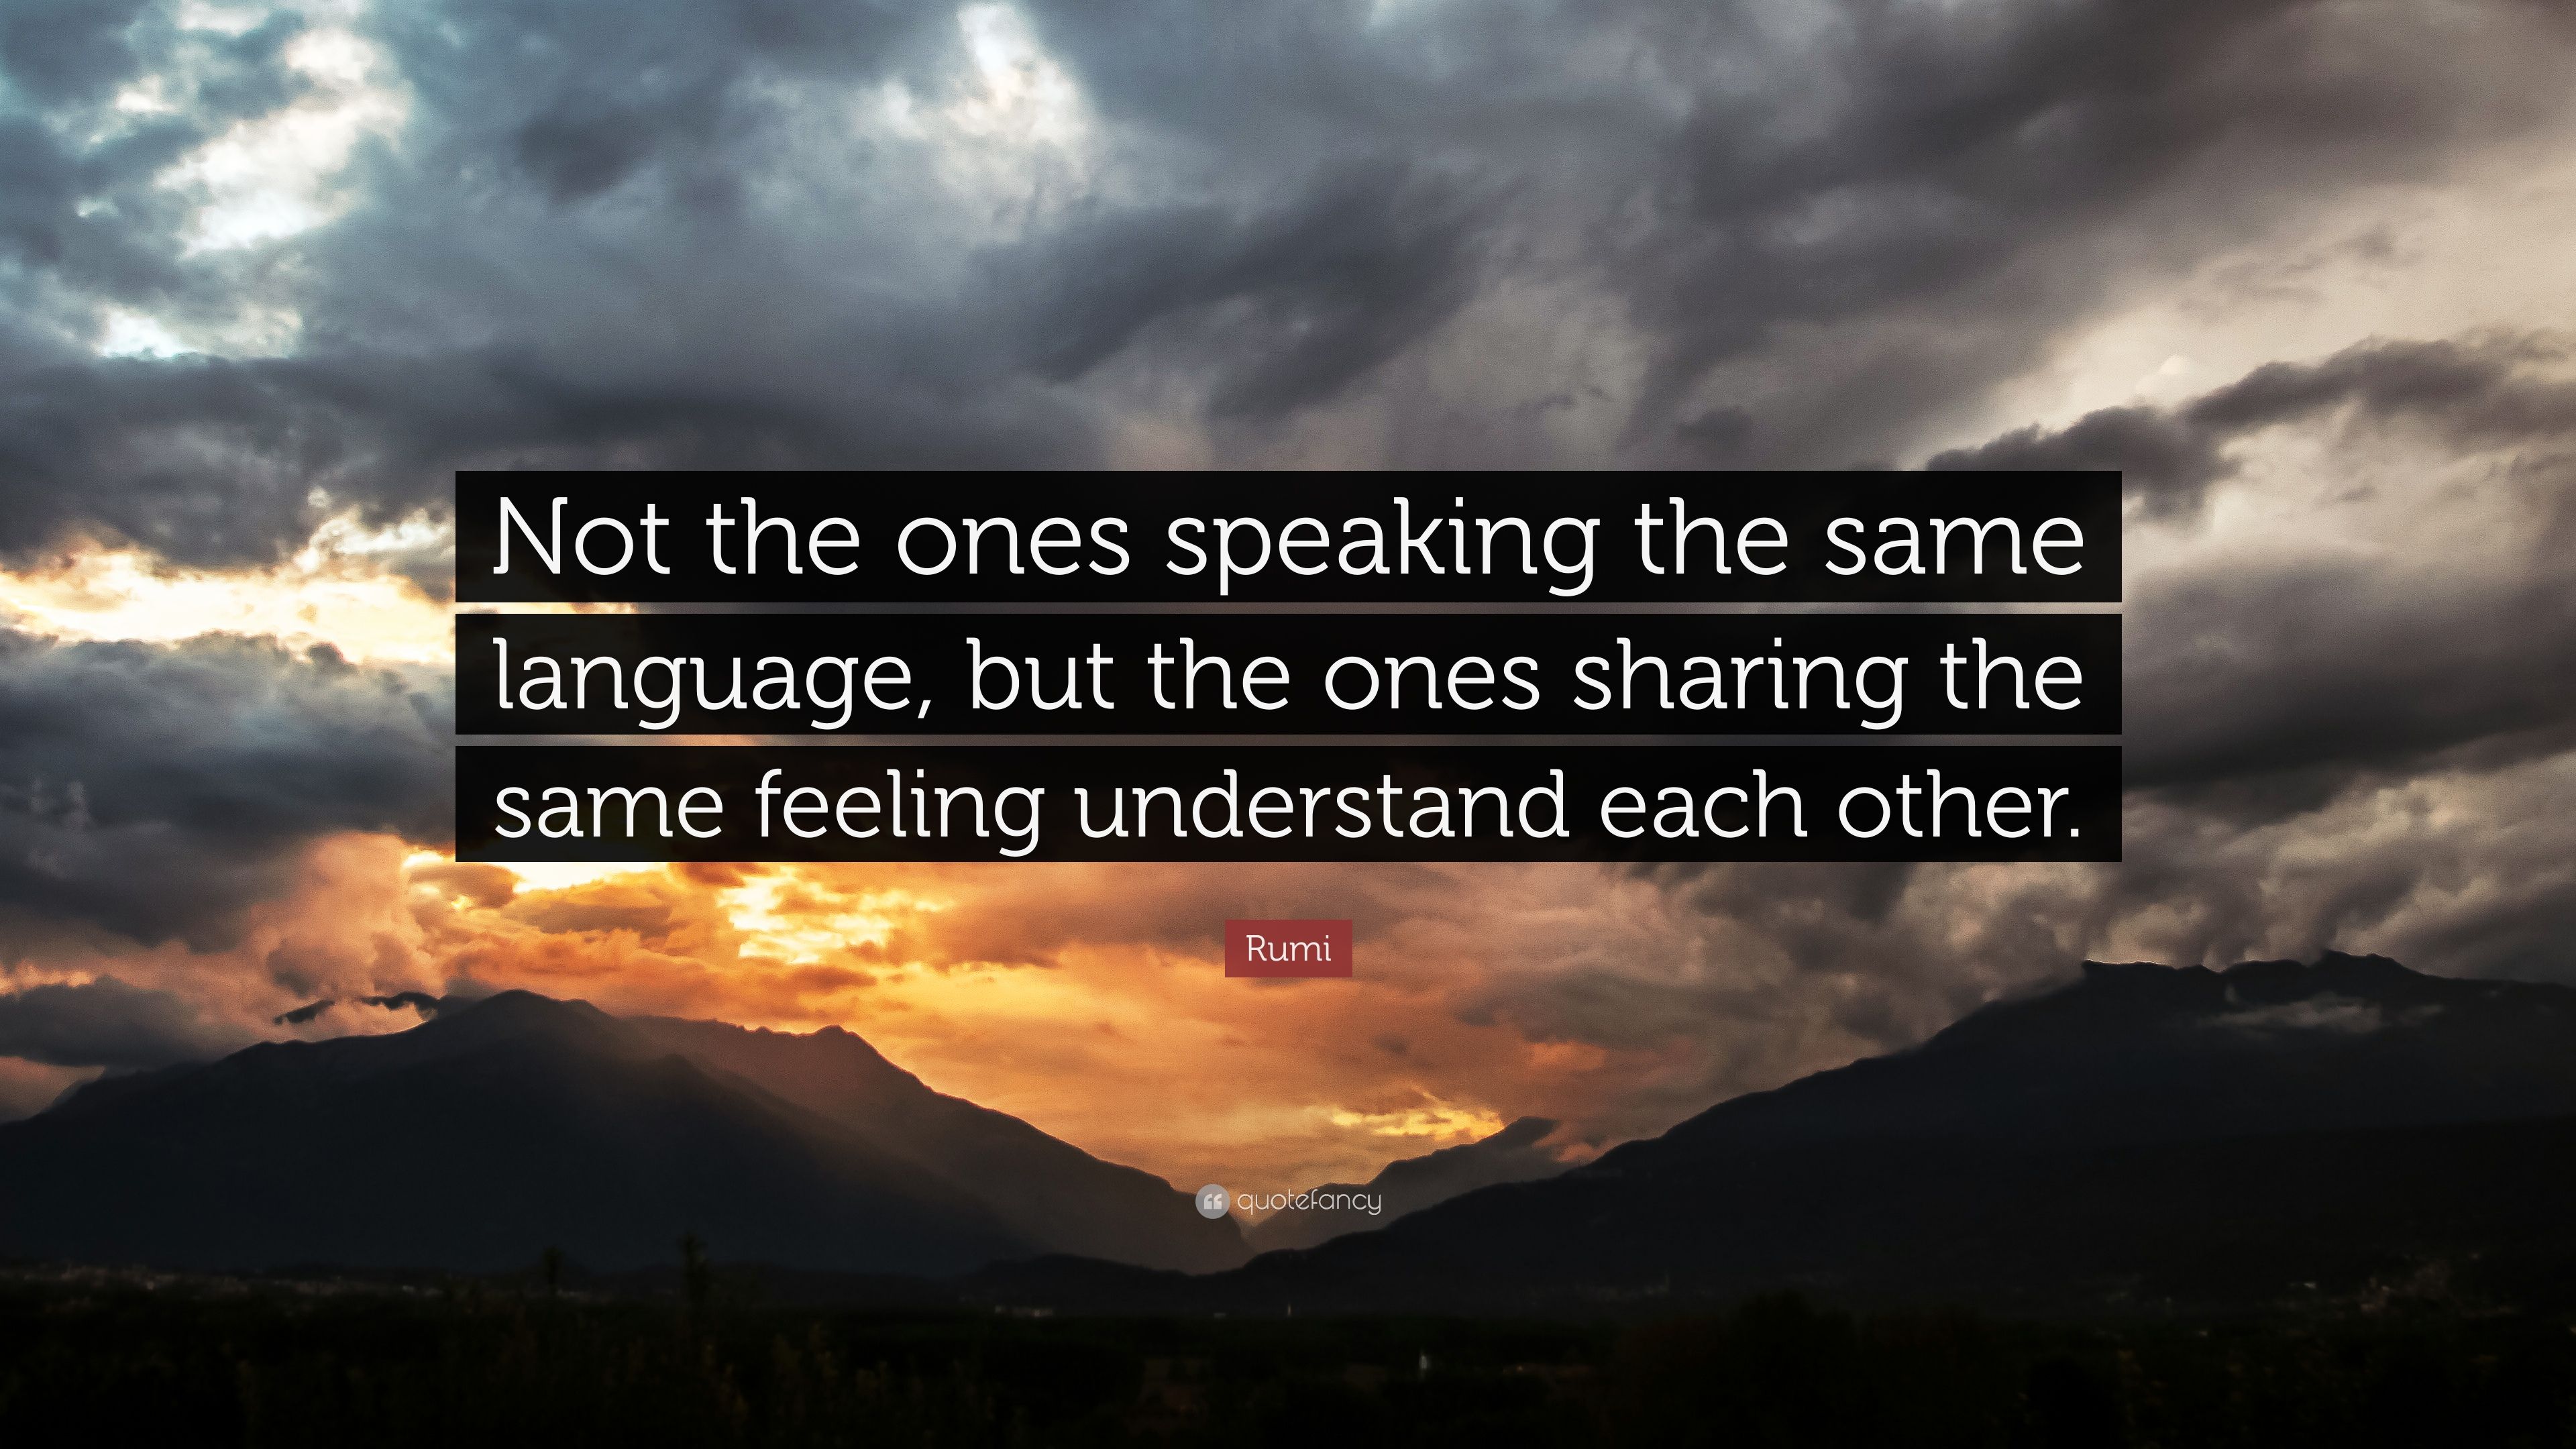 Rumi Quote: “Not the ones speaking the same language, but the ones